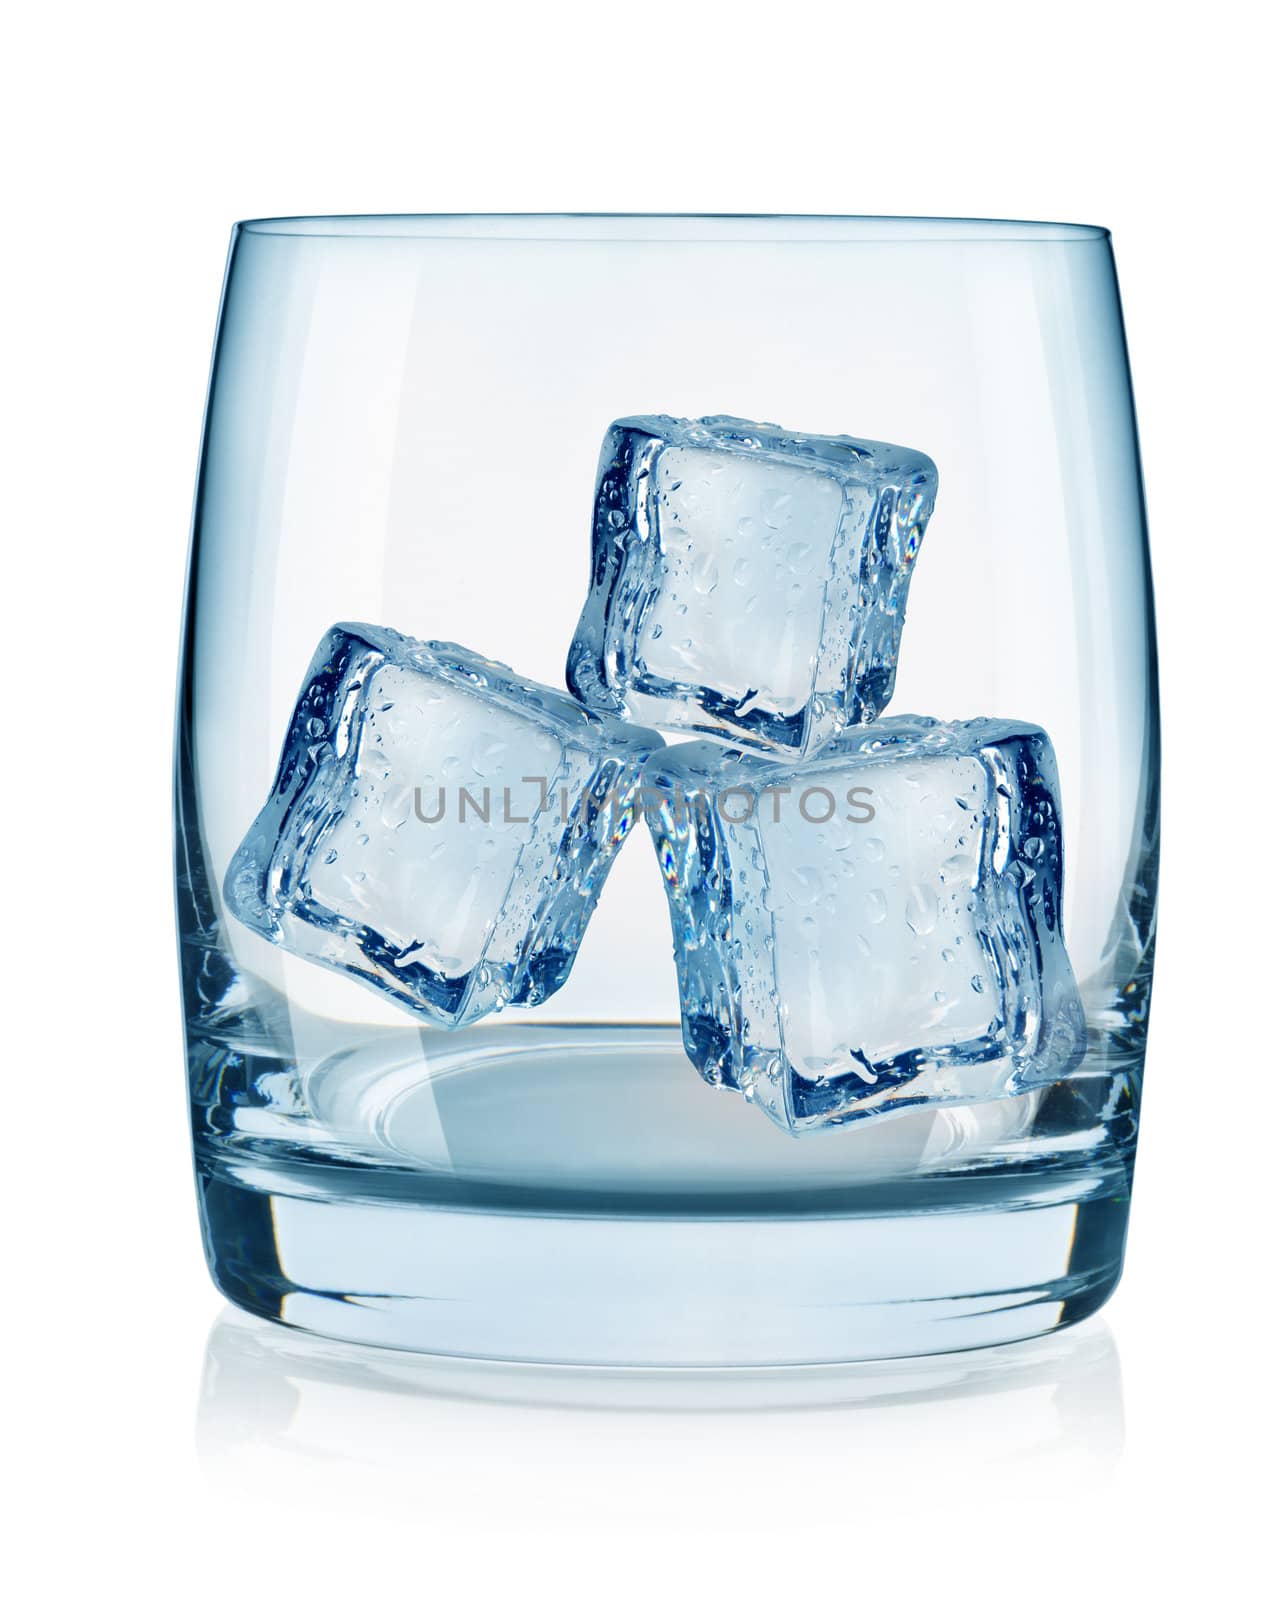 Glass and ice cubes by Givaga